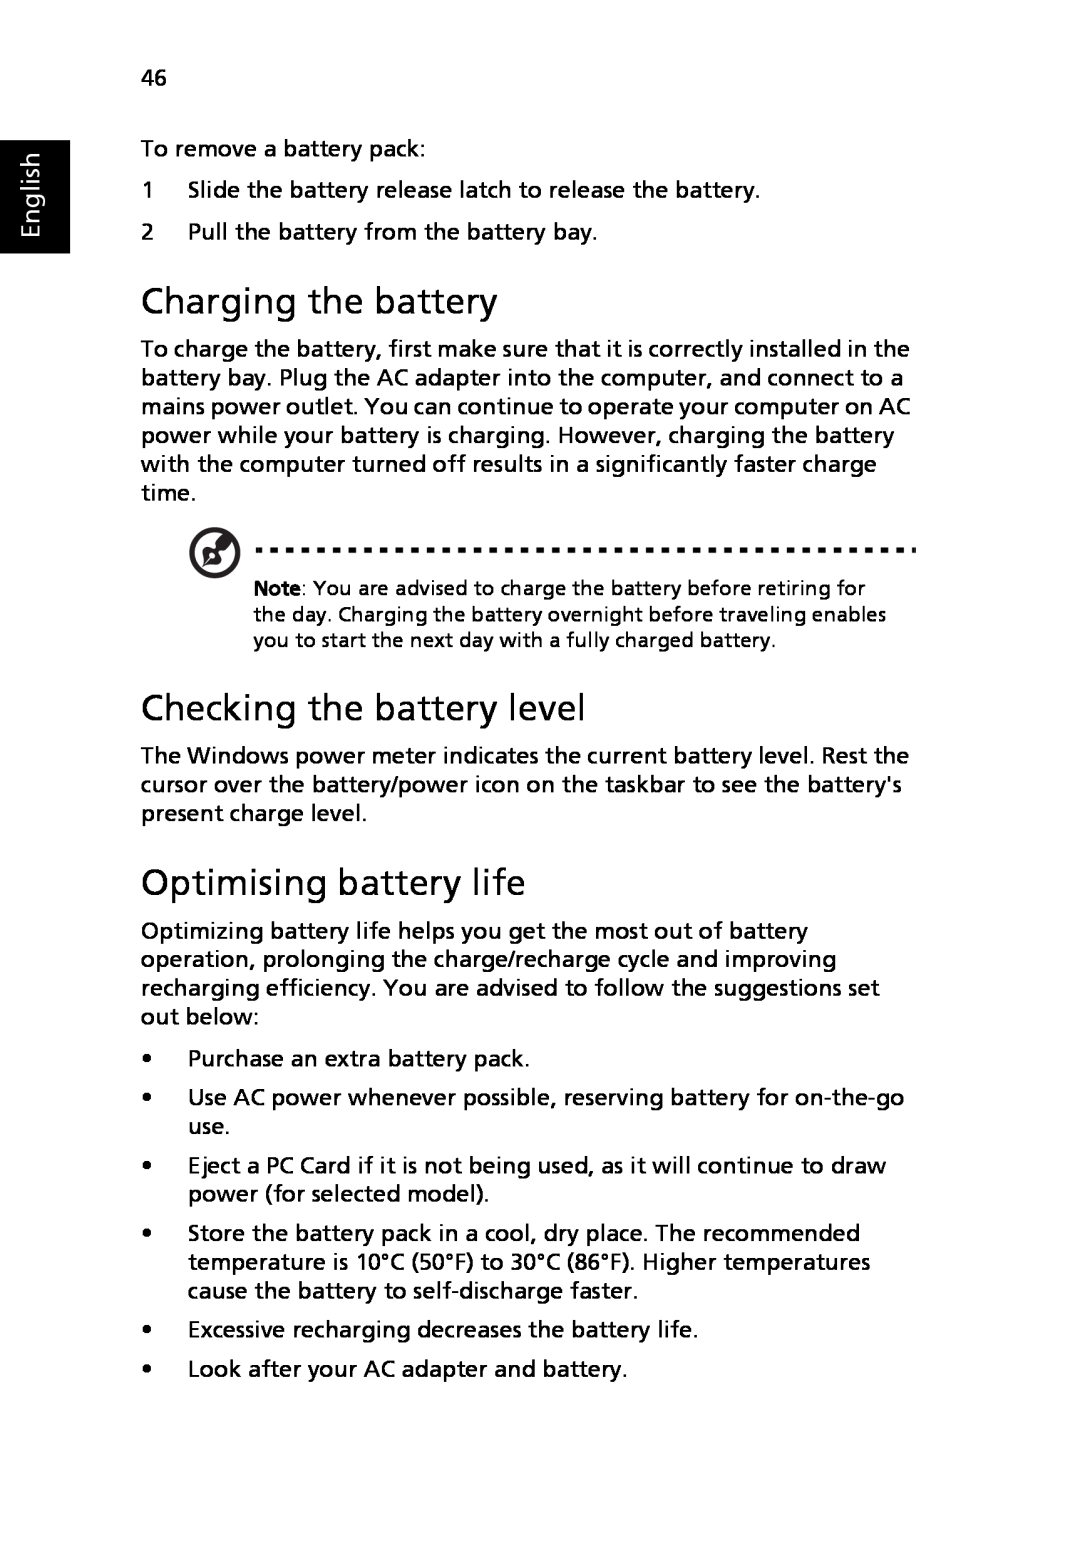 Acer 4920, MS2219 manual Charging the battery, Checking the battery level, Optimising battery life, English 